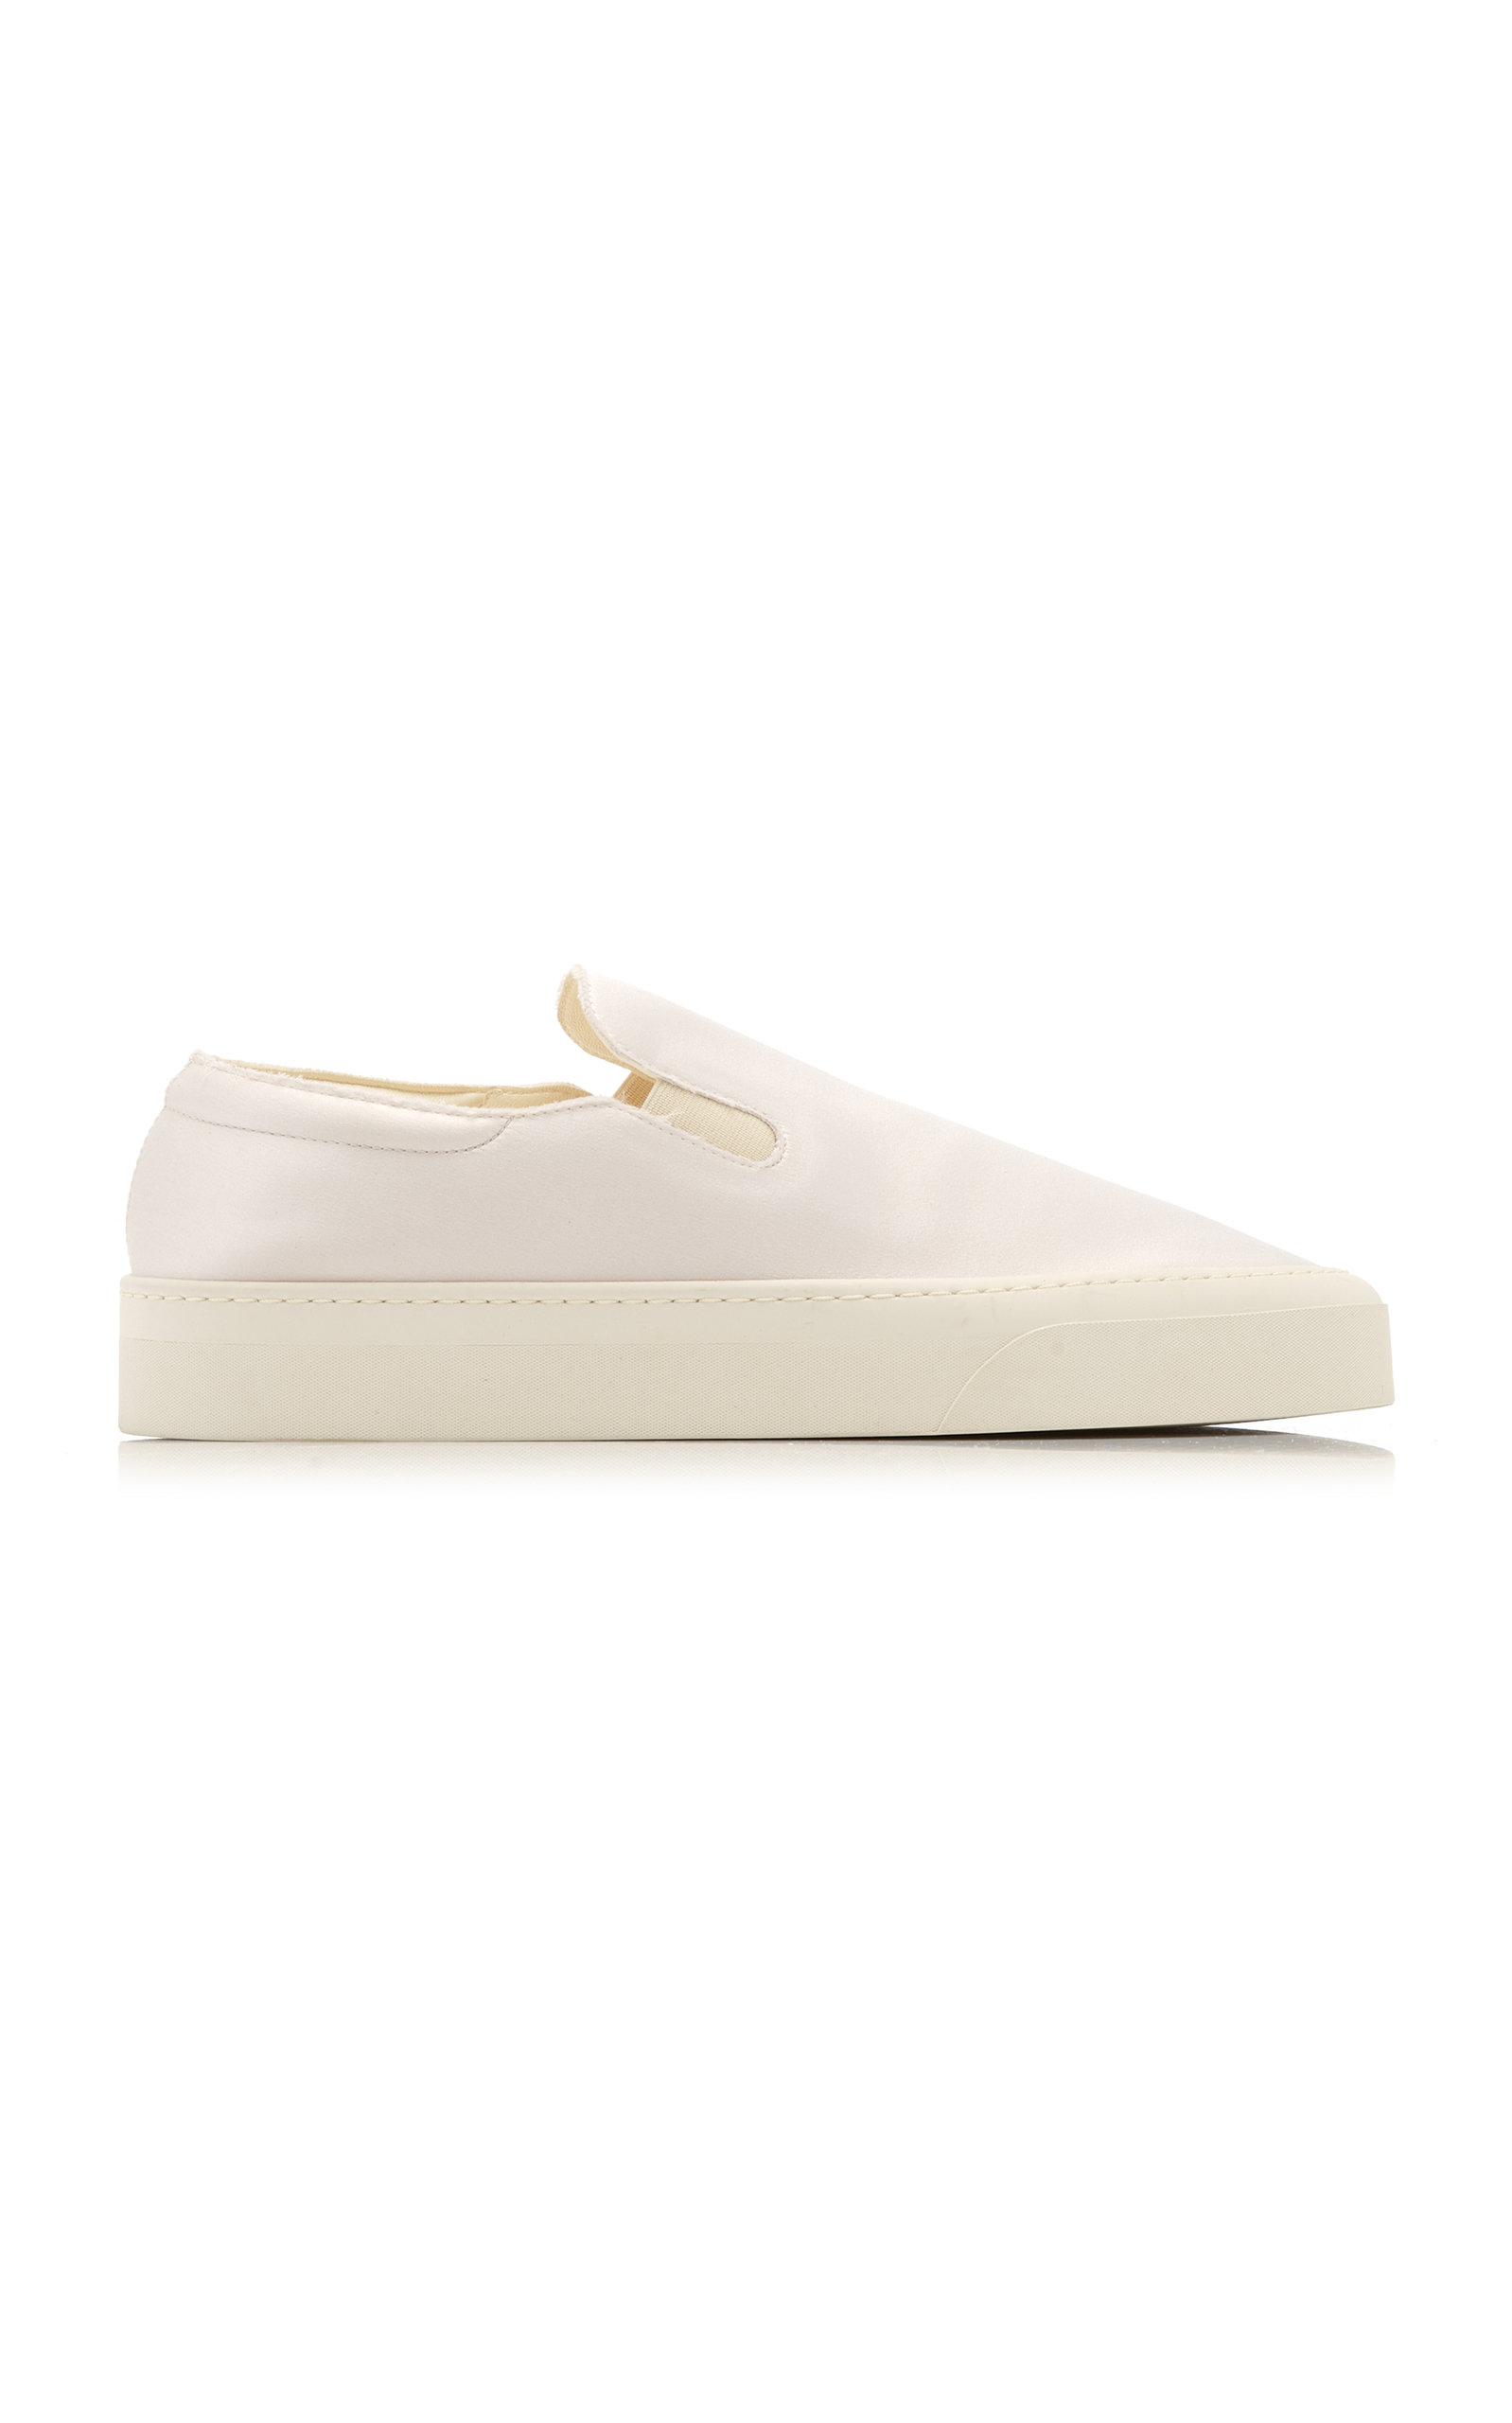 The Row Women's Marie Satin Sneakers